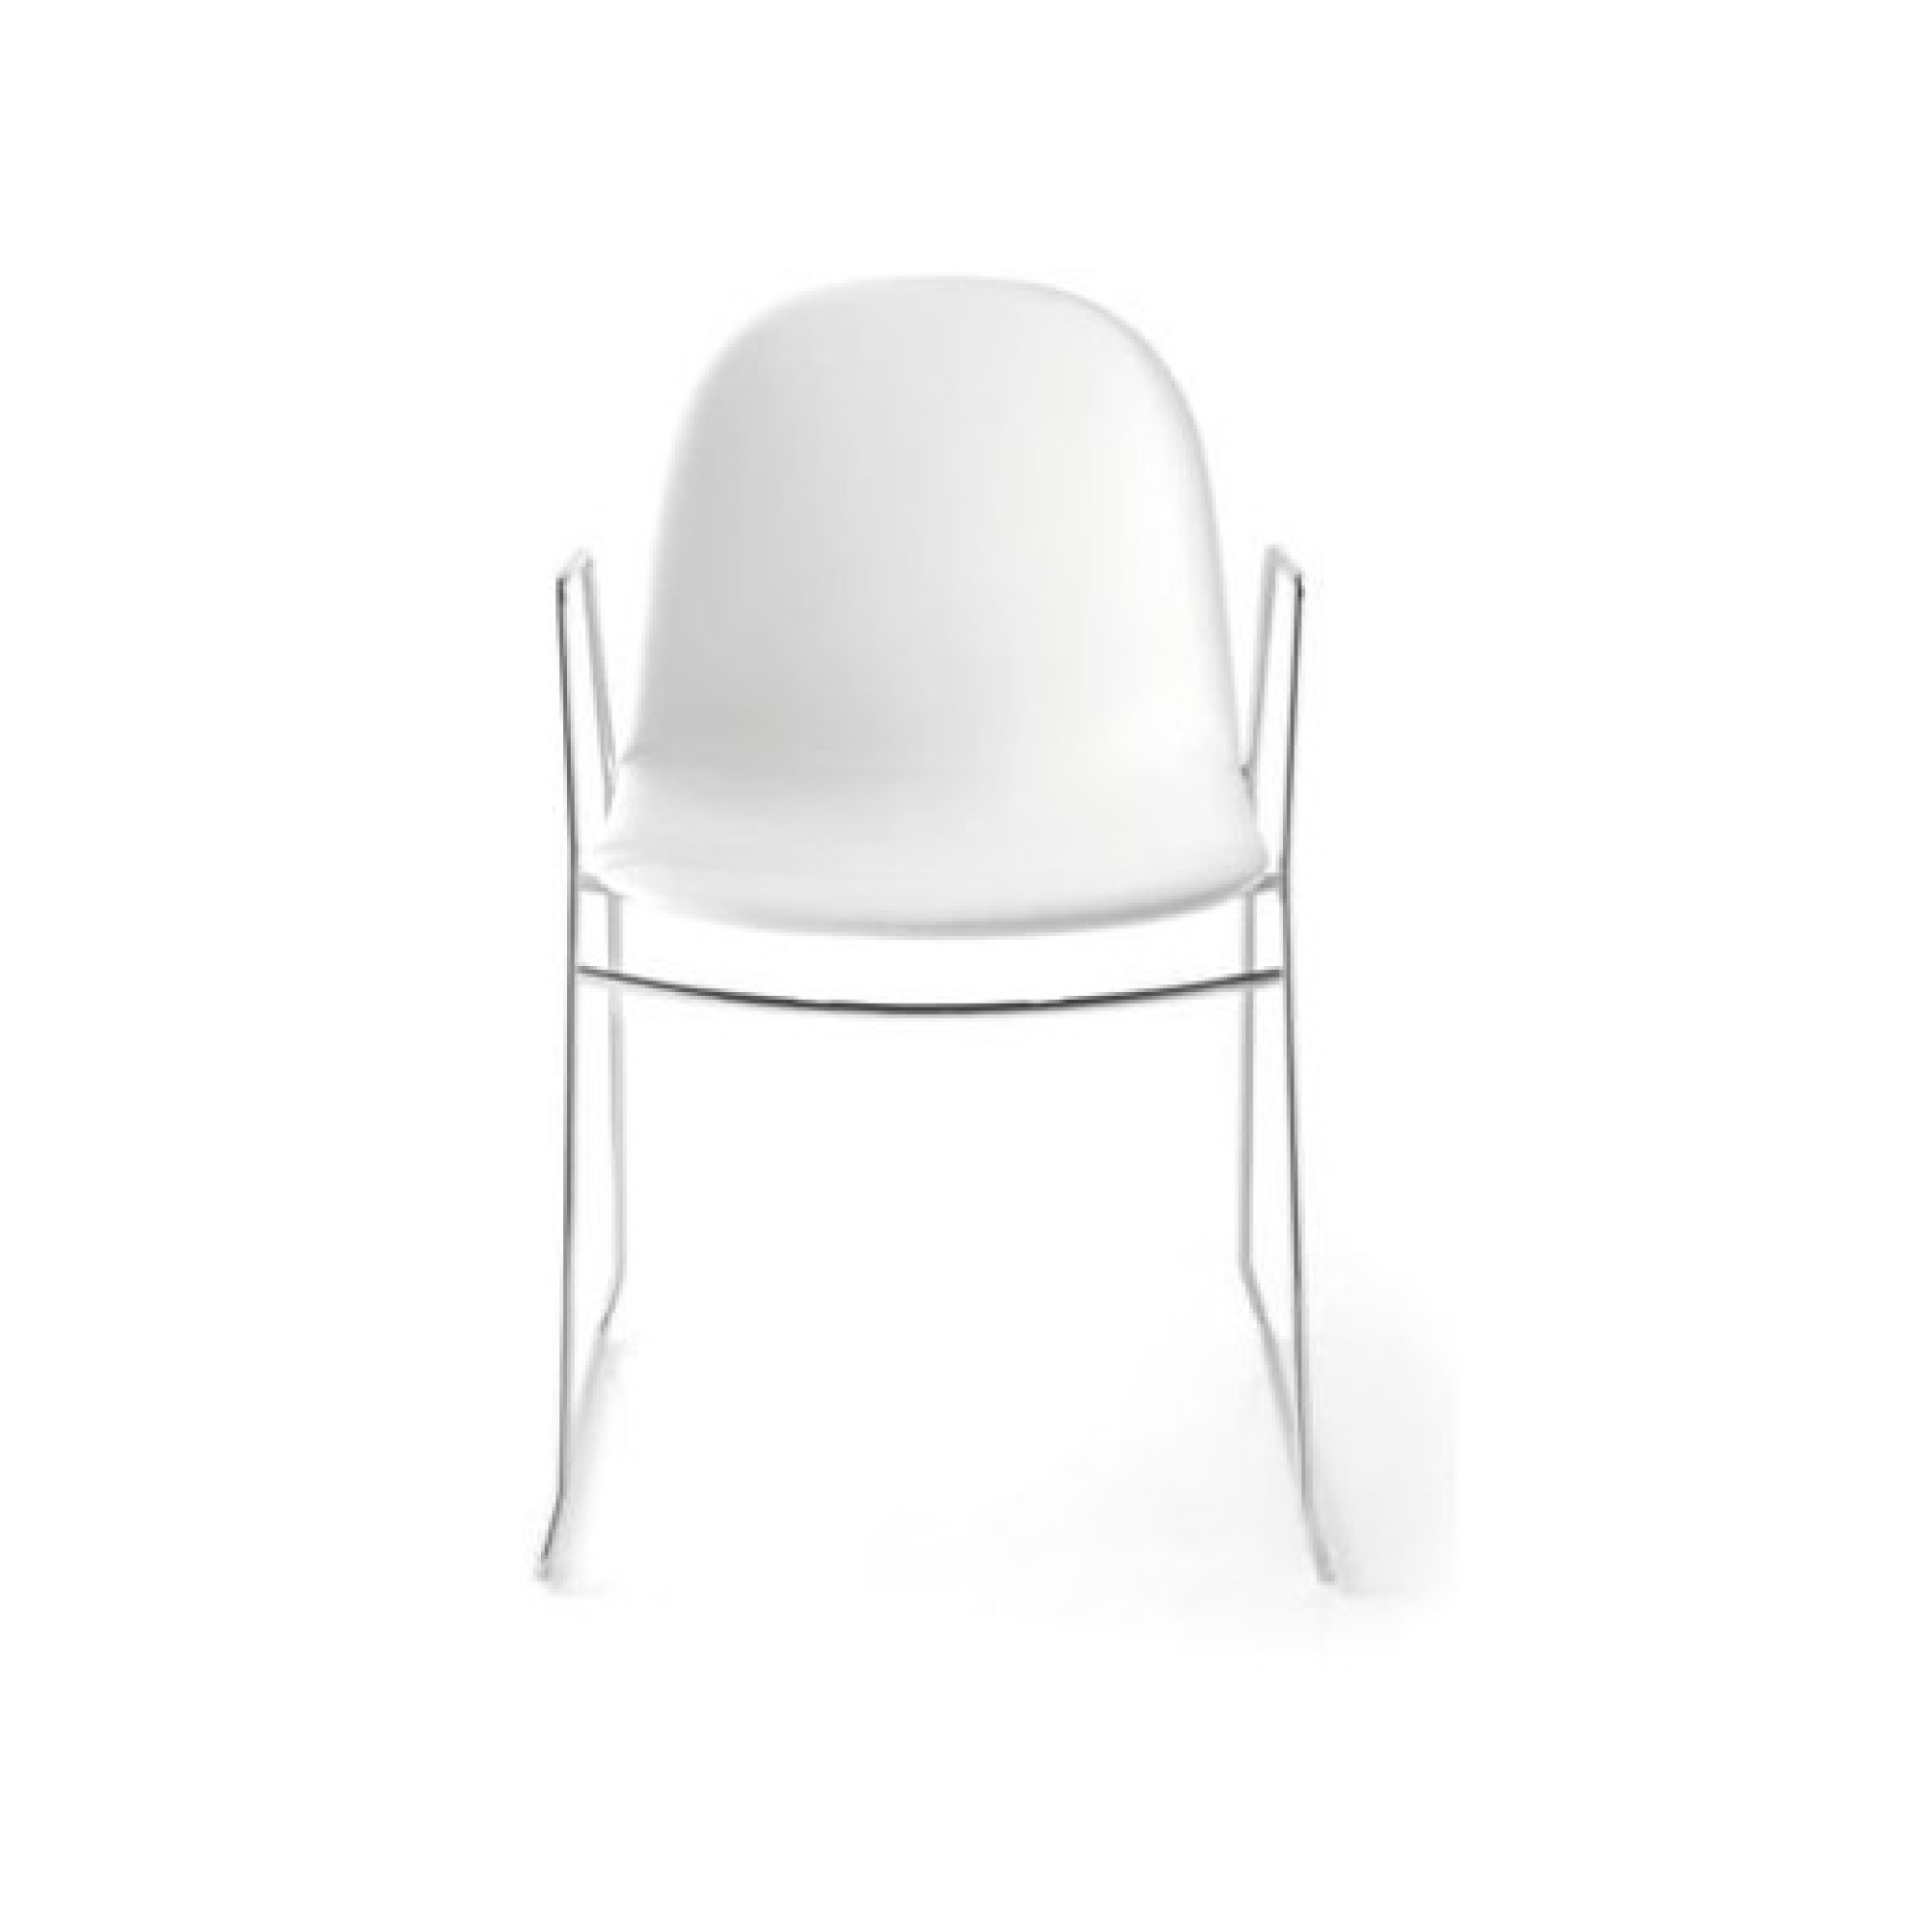 ACADEMY COVERED CHAIR WHIT ARMRESTS CB/1697